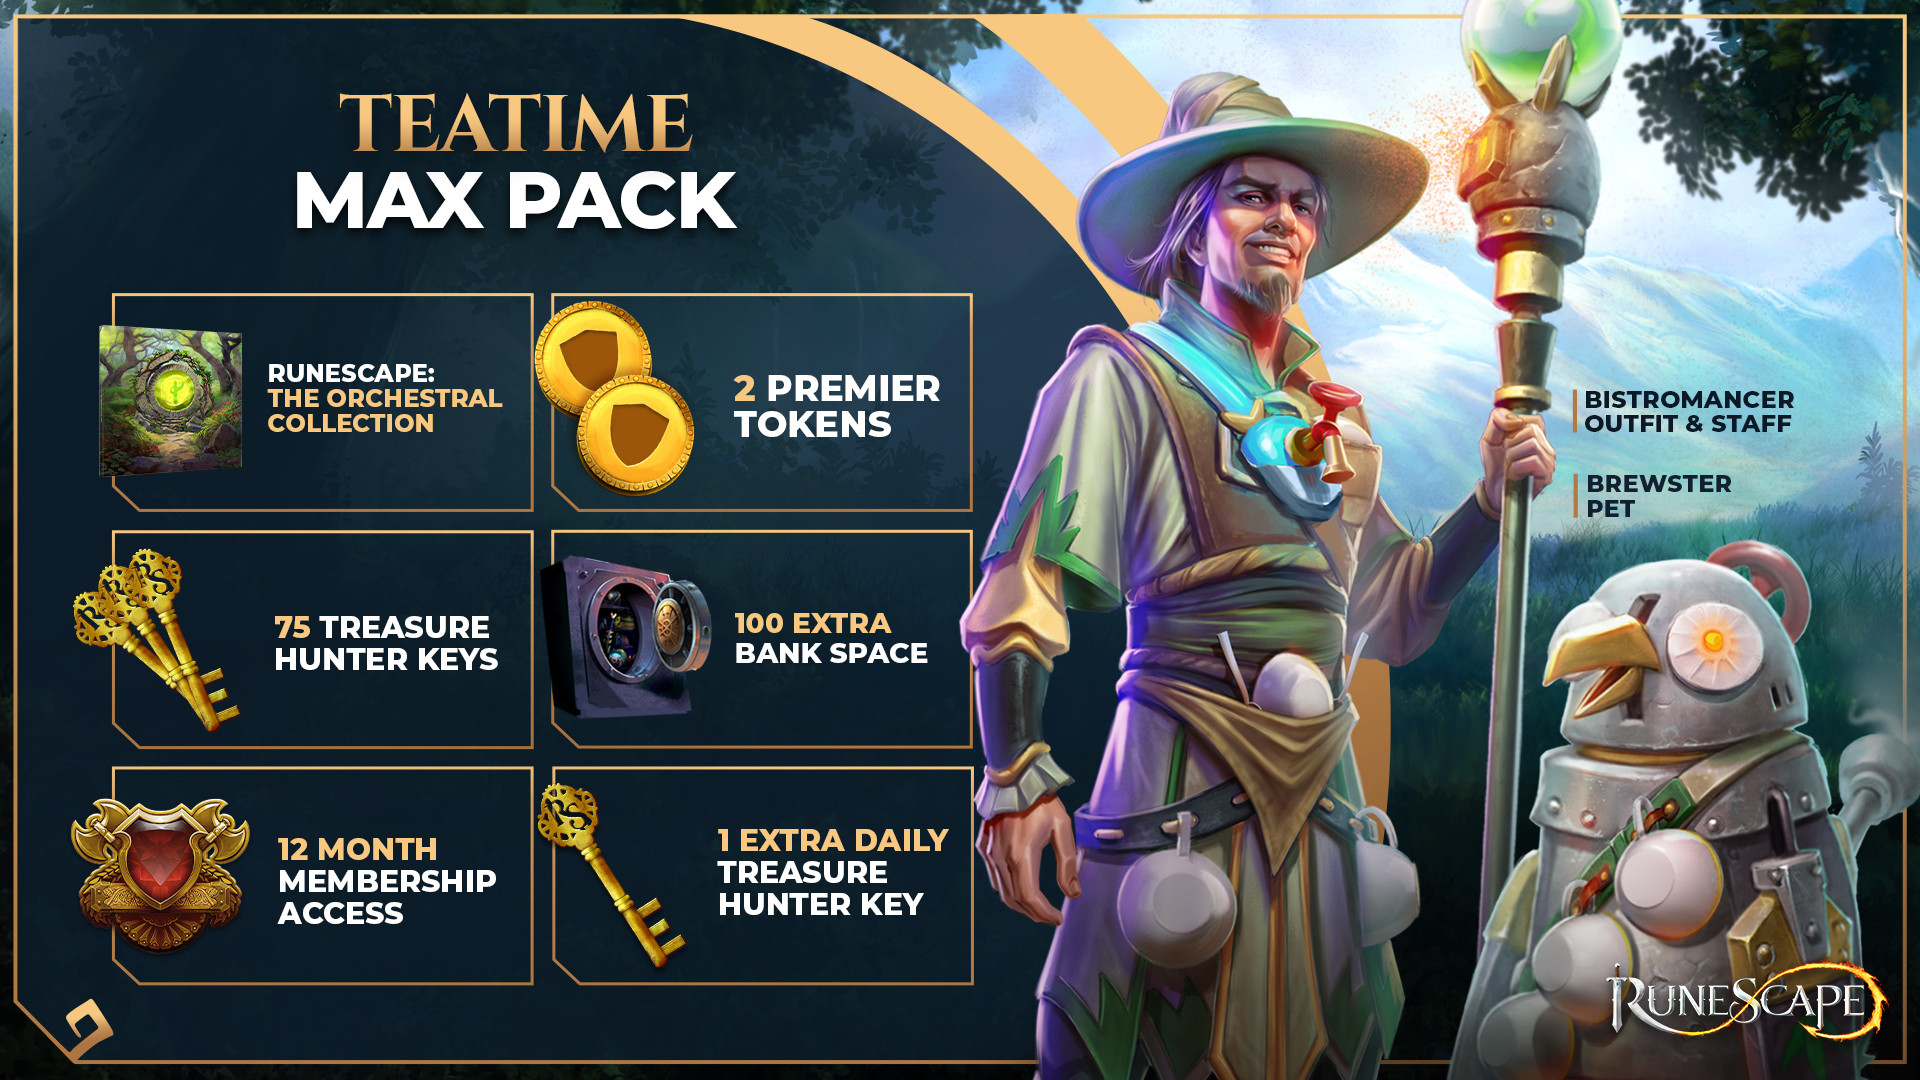 Runescape - Max Pack + 12 Months Membership Manual Delivery 56.49 USD